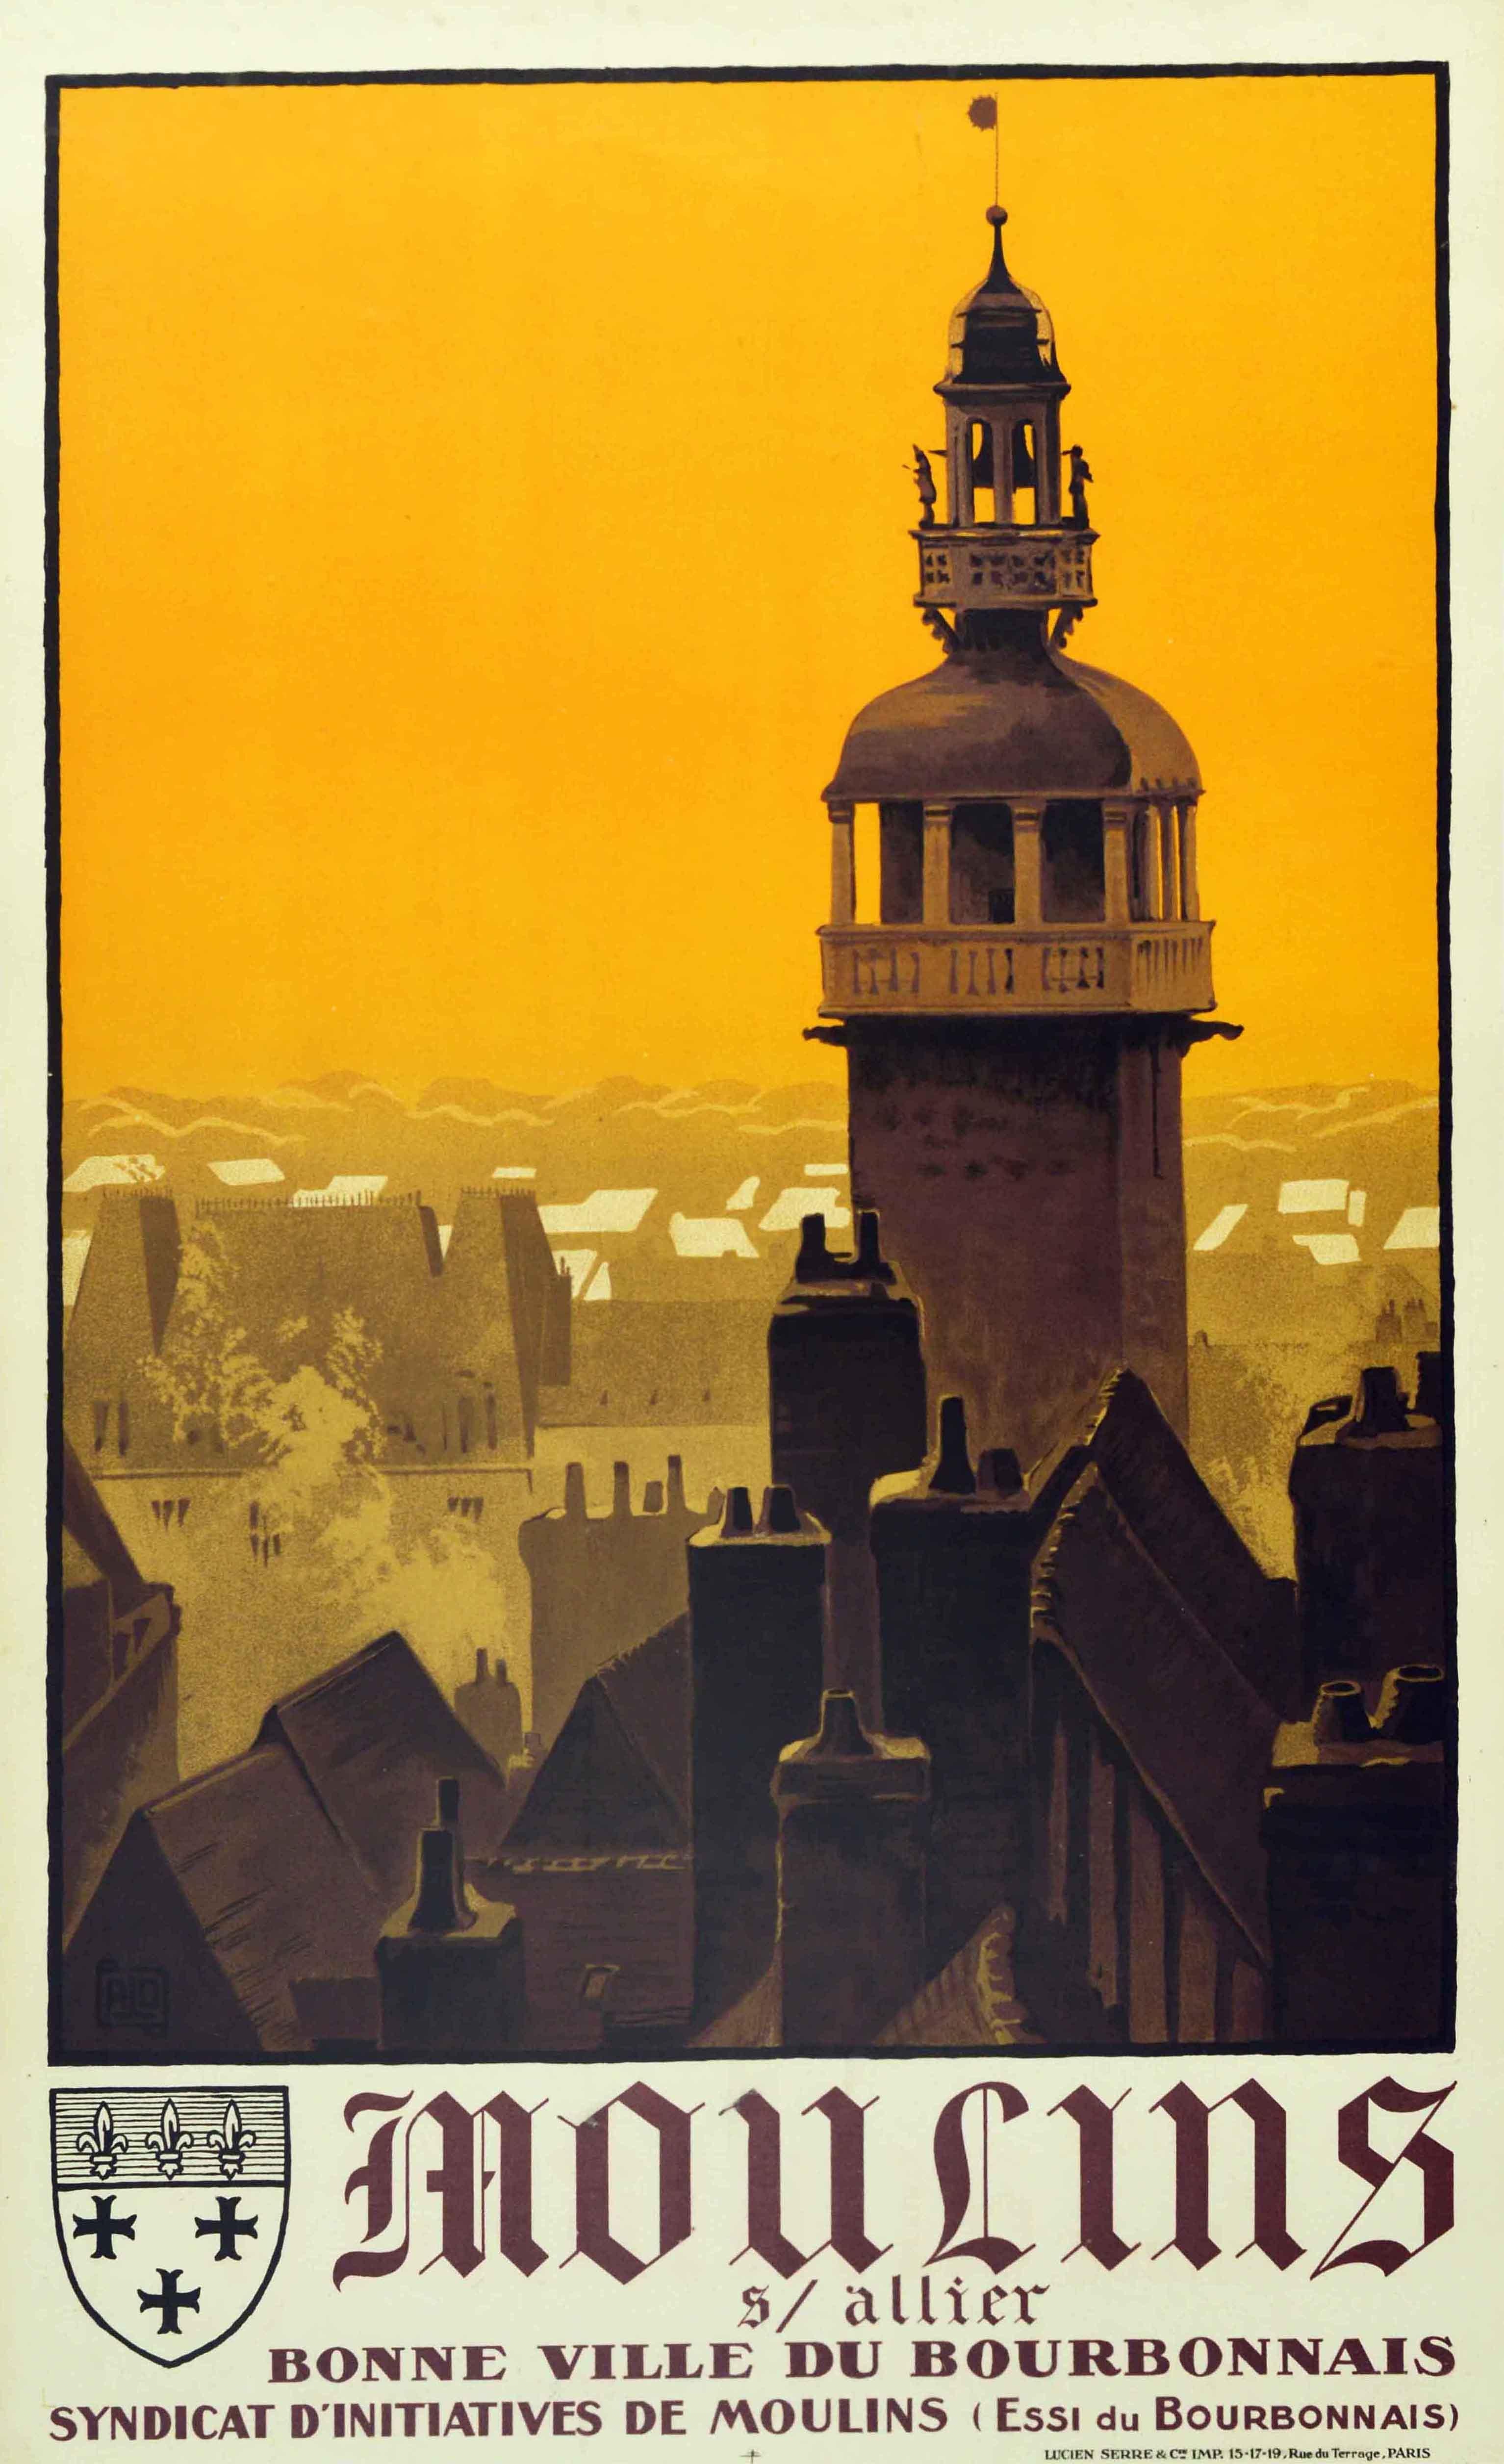 Original antique travel poster for Moulins sur Allier Bonne Ville du Bourbonnais issued by the PLM Paris Lyon Mediterranee railway depicting a stunning view of the town showing the historic old rooftops and smoke rising from the chimneys with the